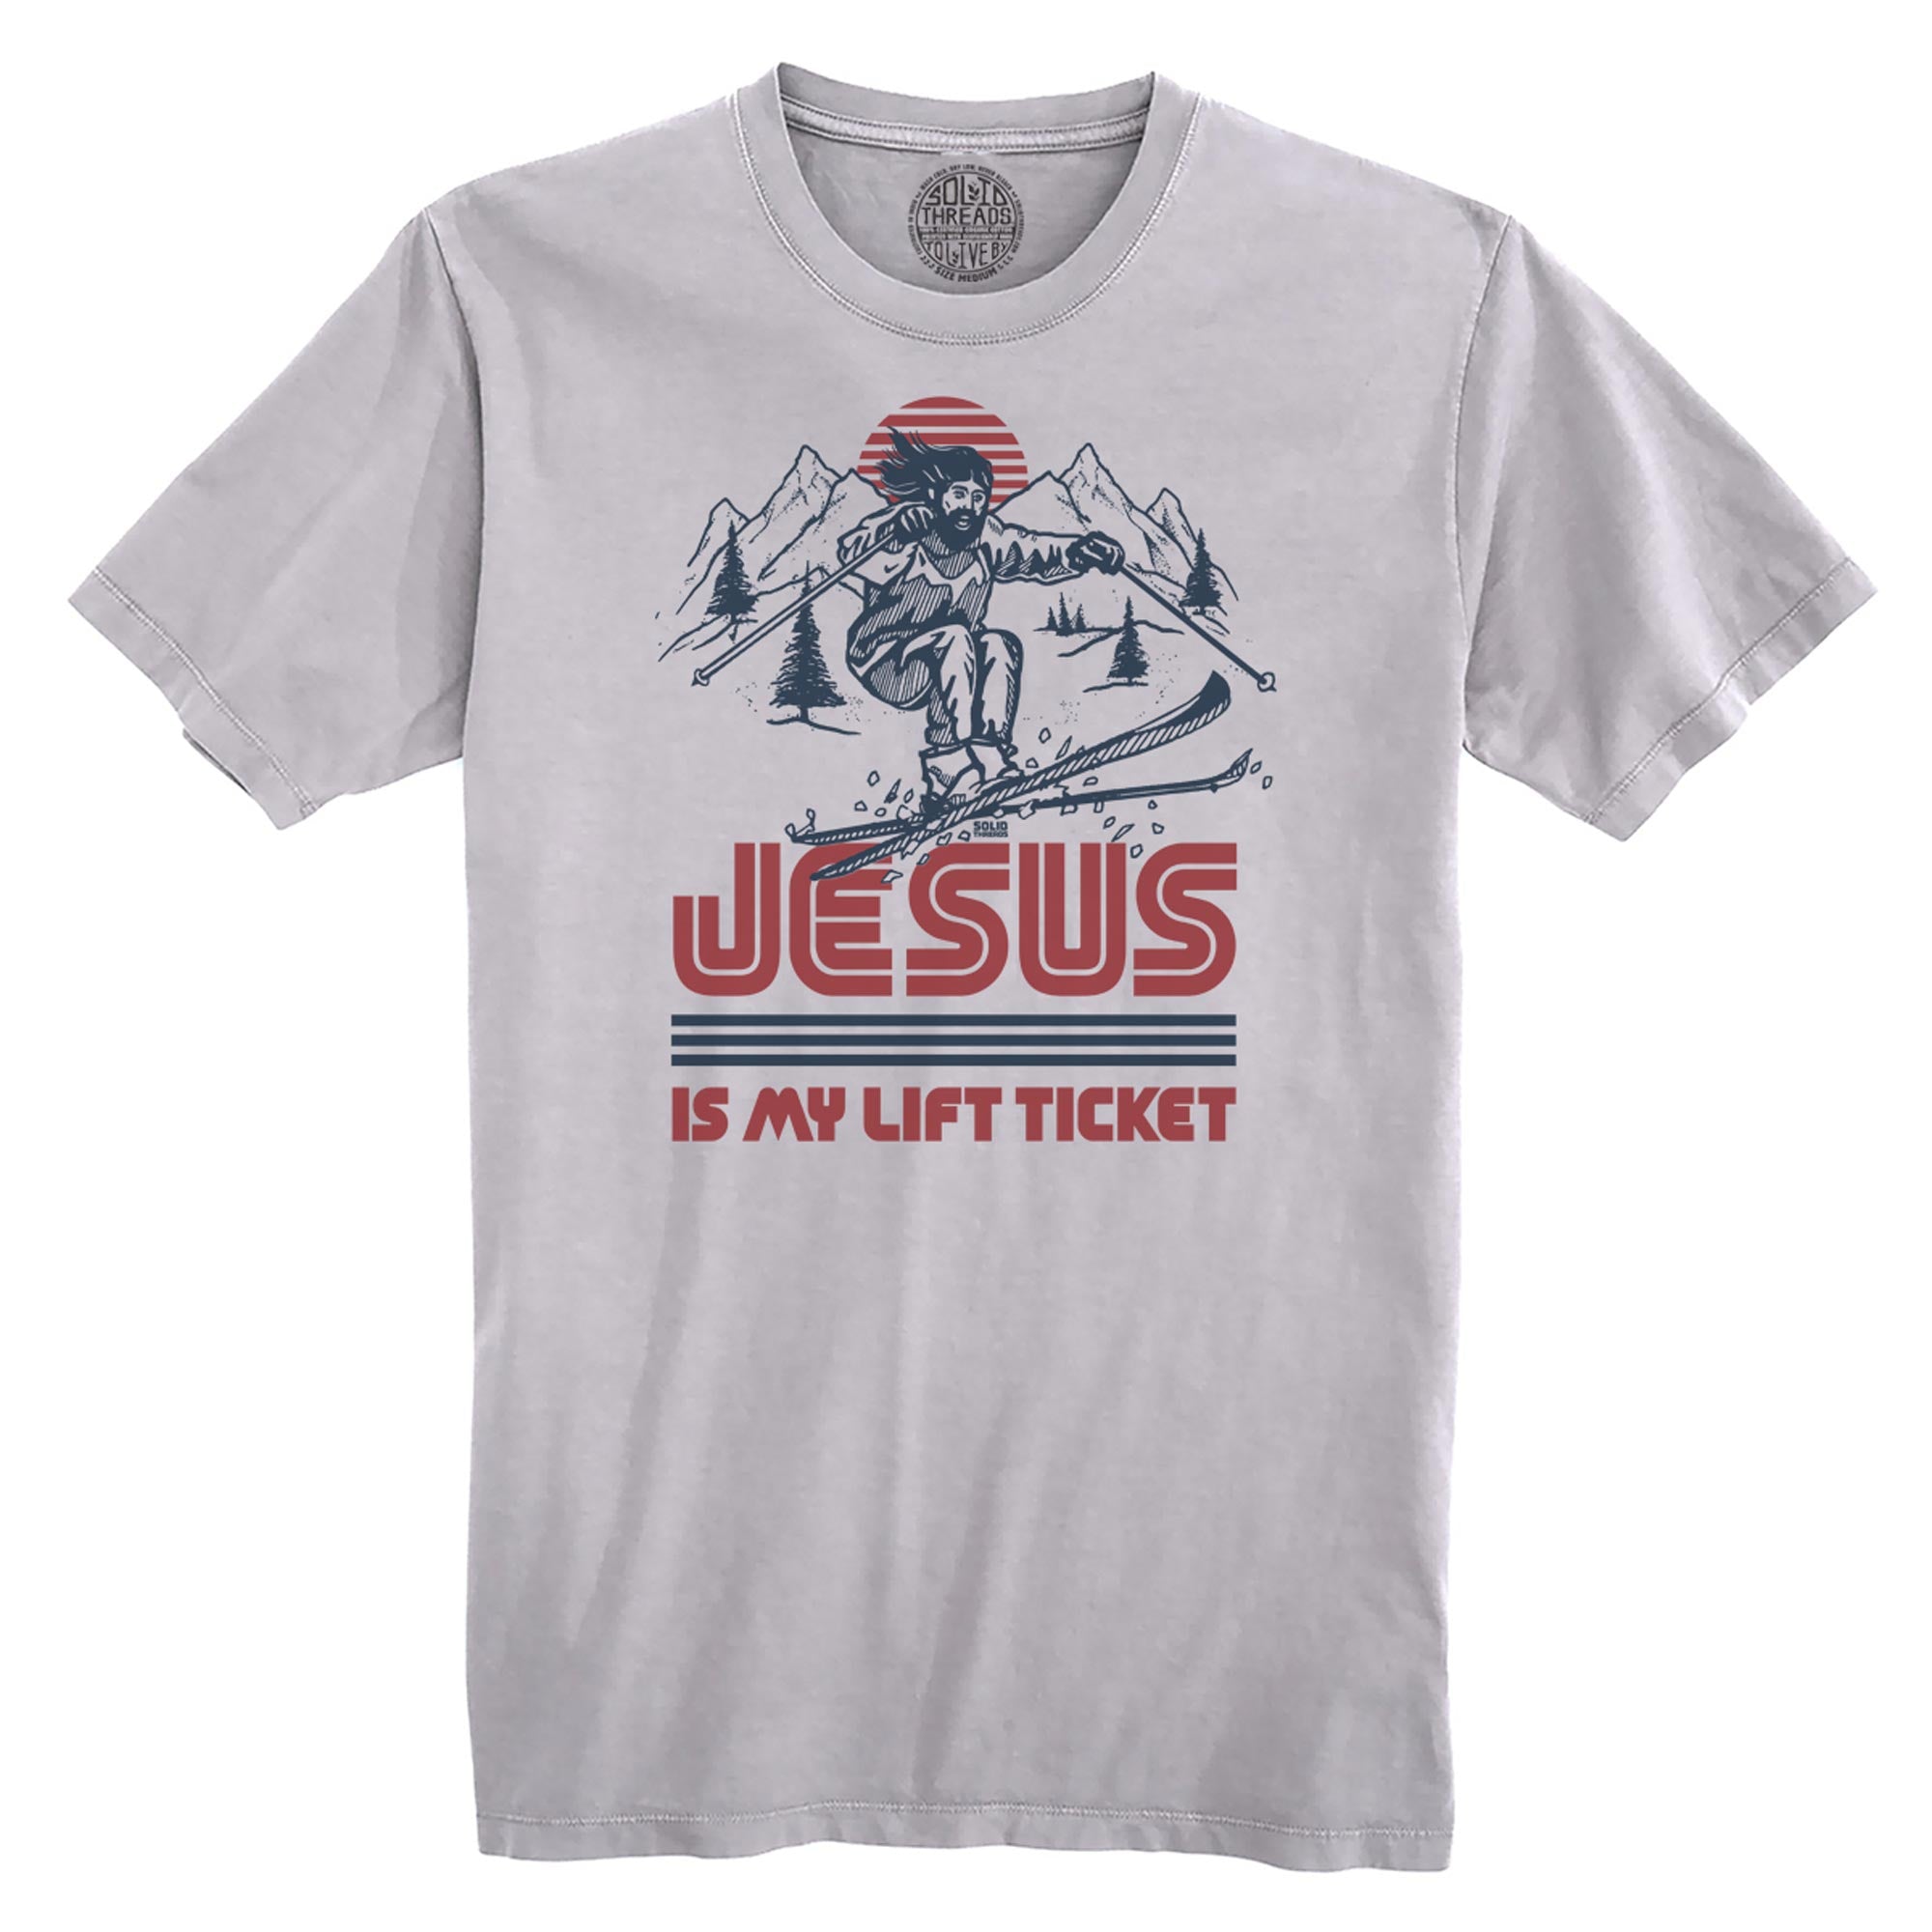 Jesus Is My Lift Ticket Funny Organic Cotton T-shirt | Cool Skiing   Tee | Solid Threads